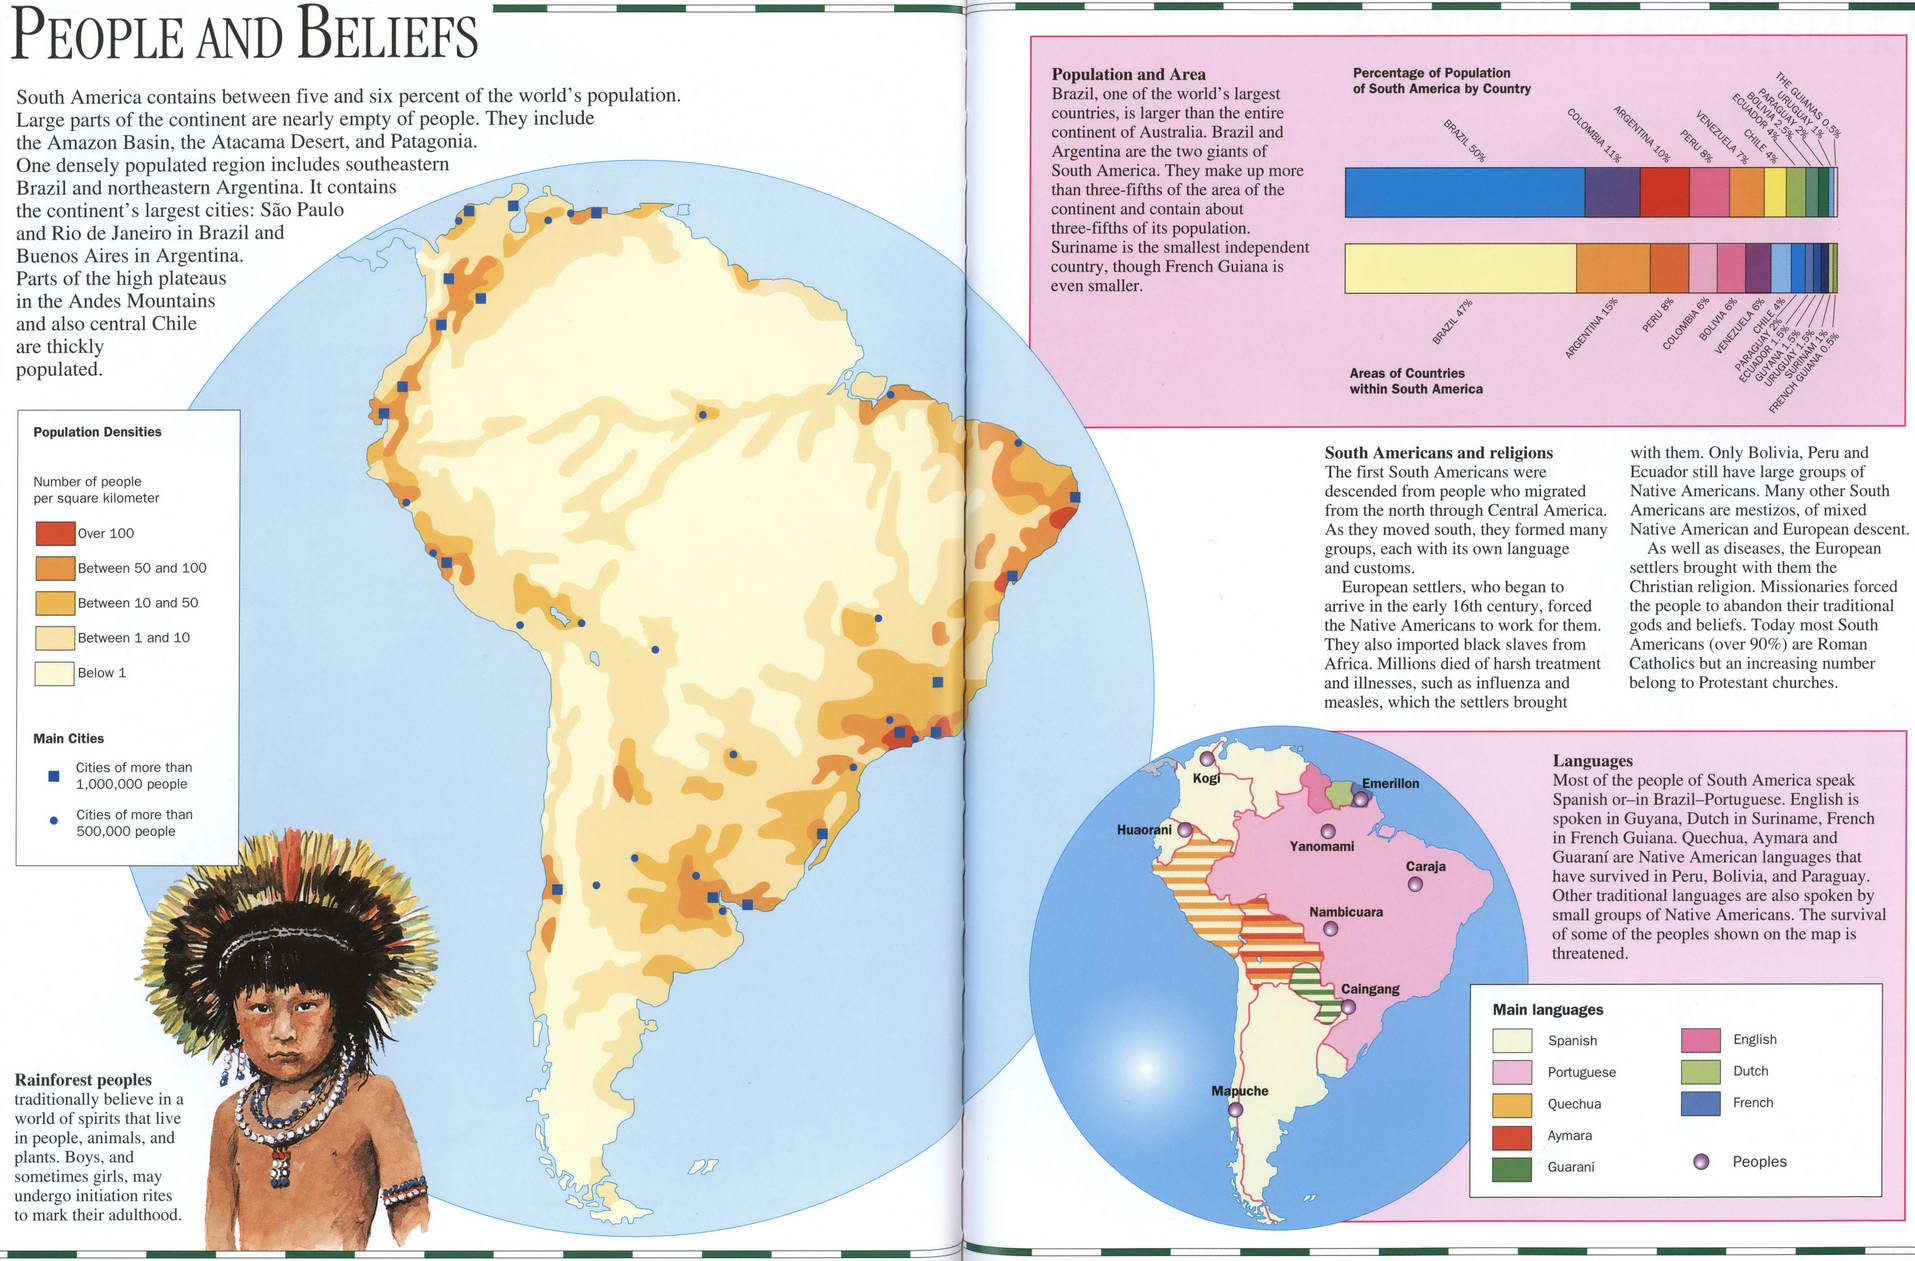 Map of the peoples and religions of South America